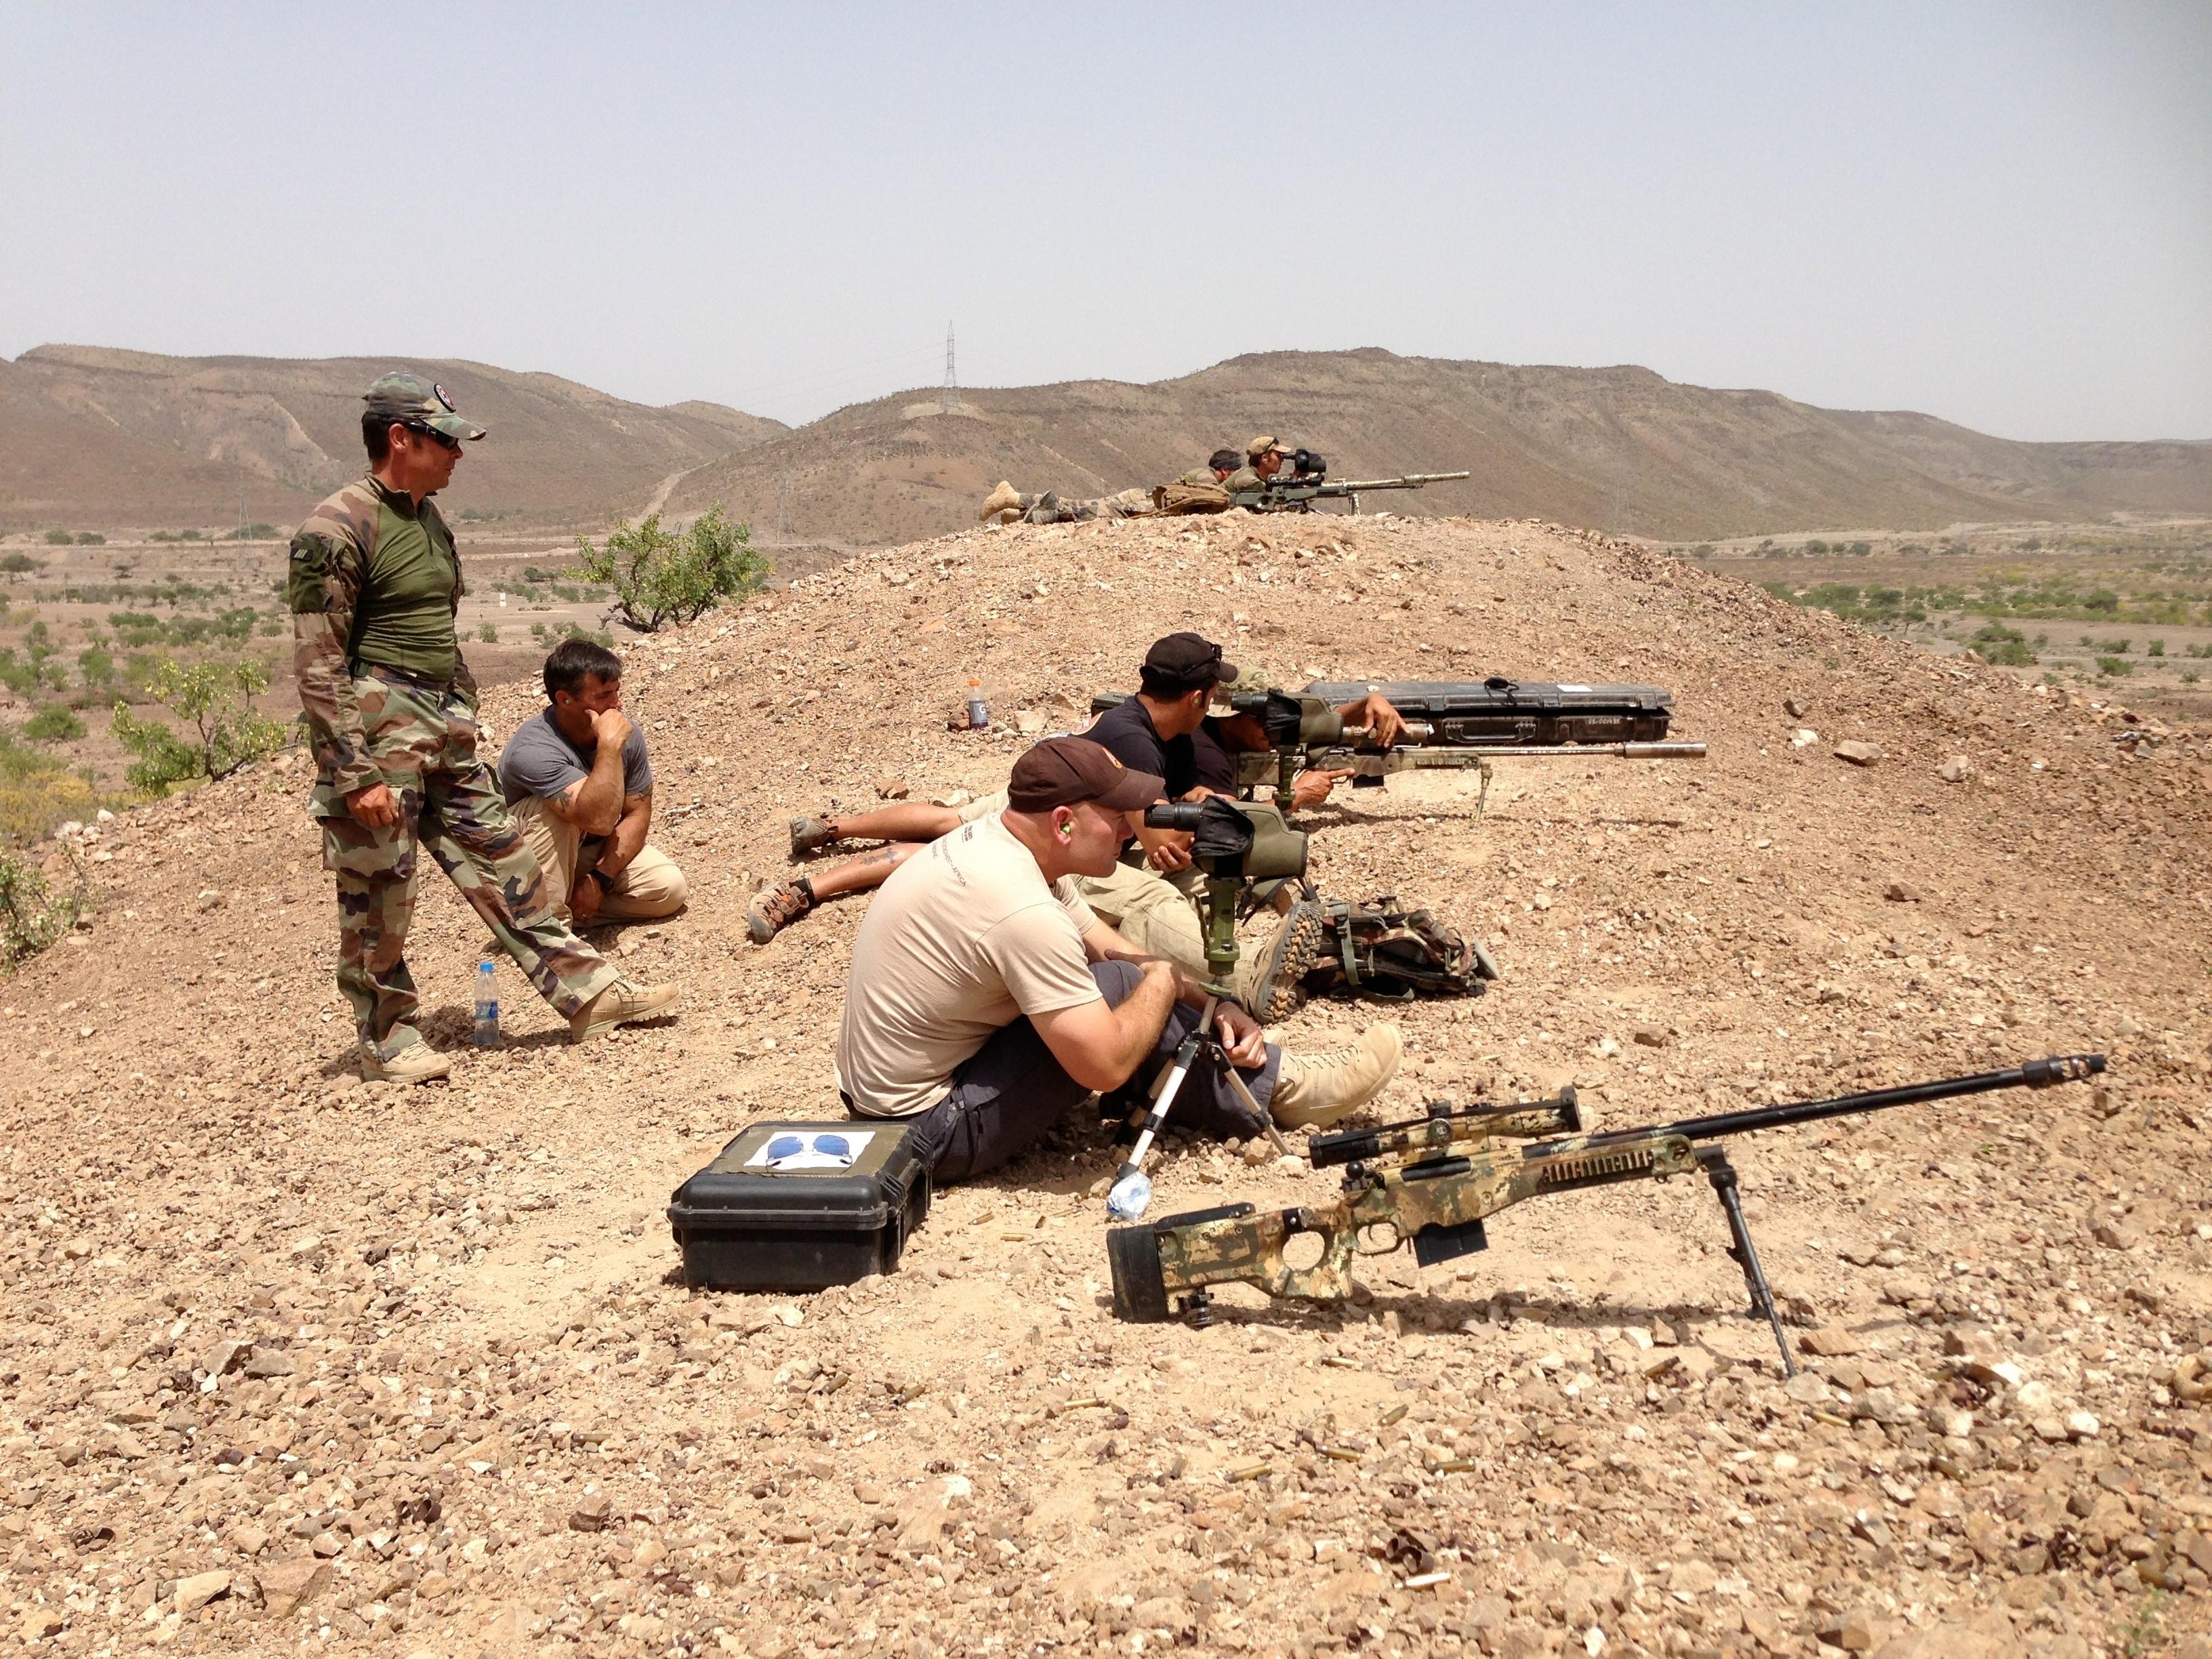 U.S. Army Maj. Duncan Smith, Special Operations Detachment - Africa (SOD-A), Texas Army National Guard, front, trains alongside U.S. special forces and French special operations snipers on various sniper and spotting techniques using French weapons systems, Djibouti, May 2013. SOD-A soldiers conduct various missions in Africa in support of Special Operations Command-Africa, whose goal is to promote regional stability in that region. (Courtesy photo).